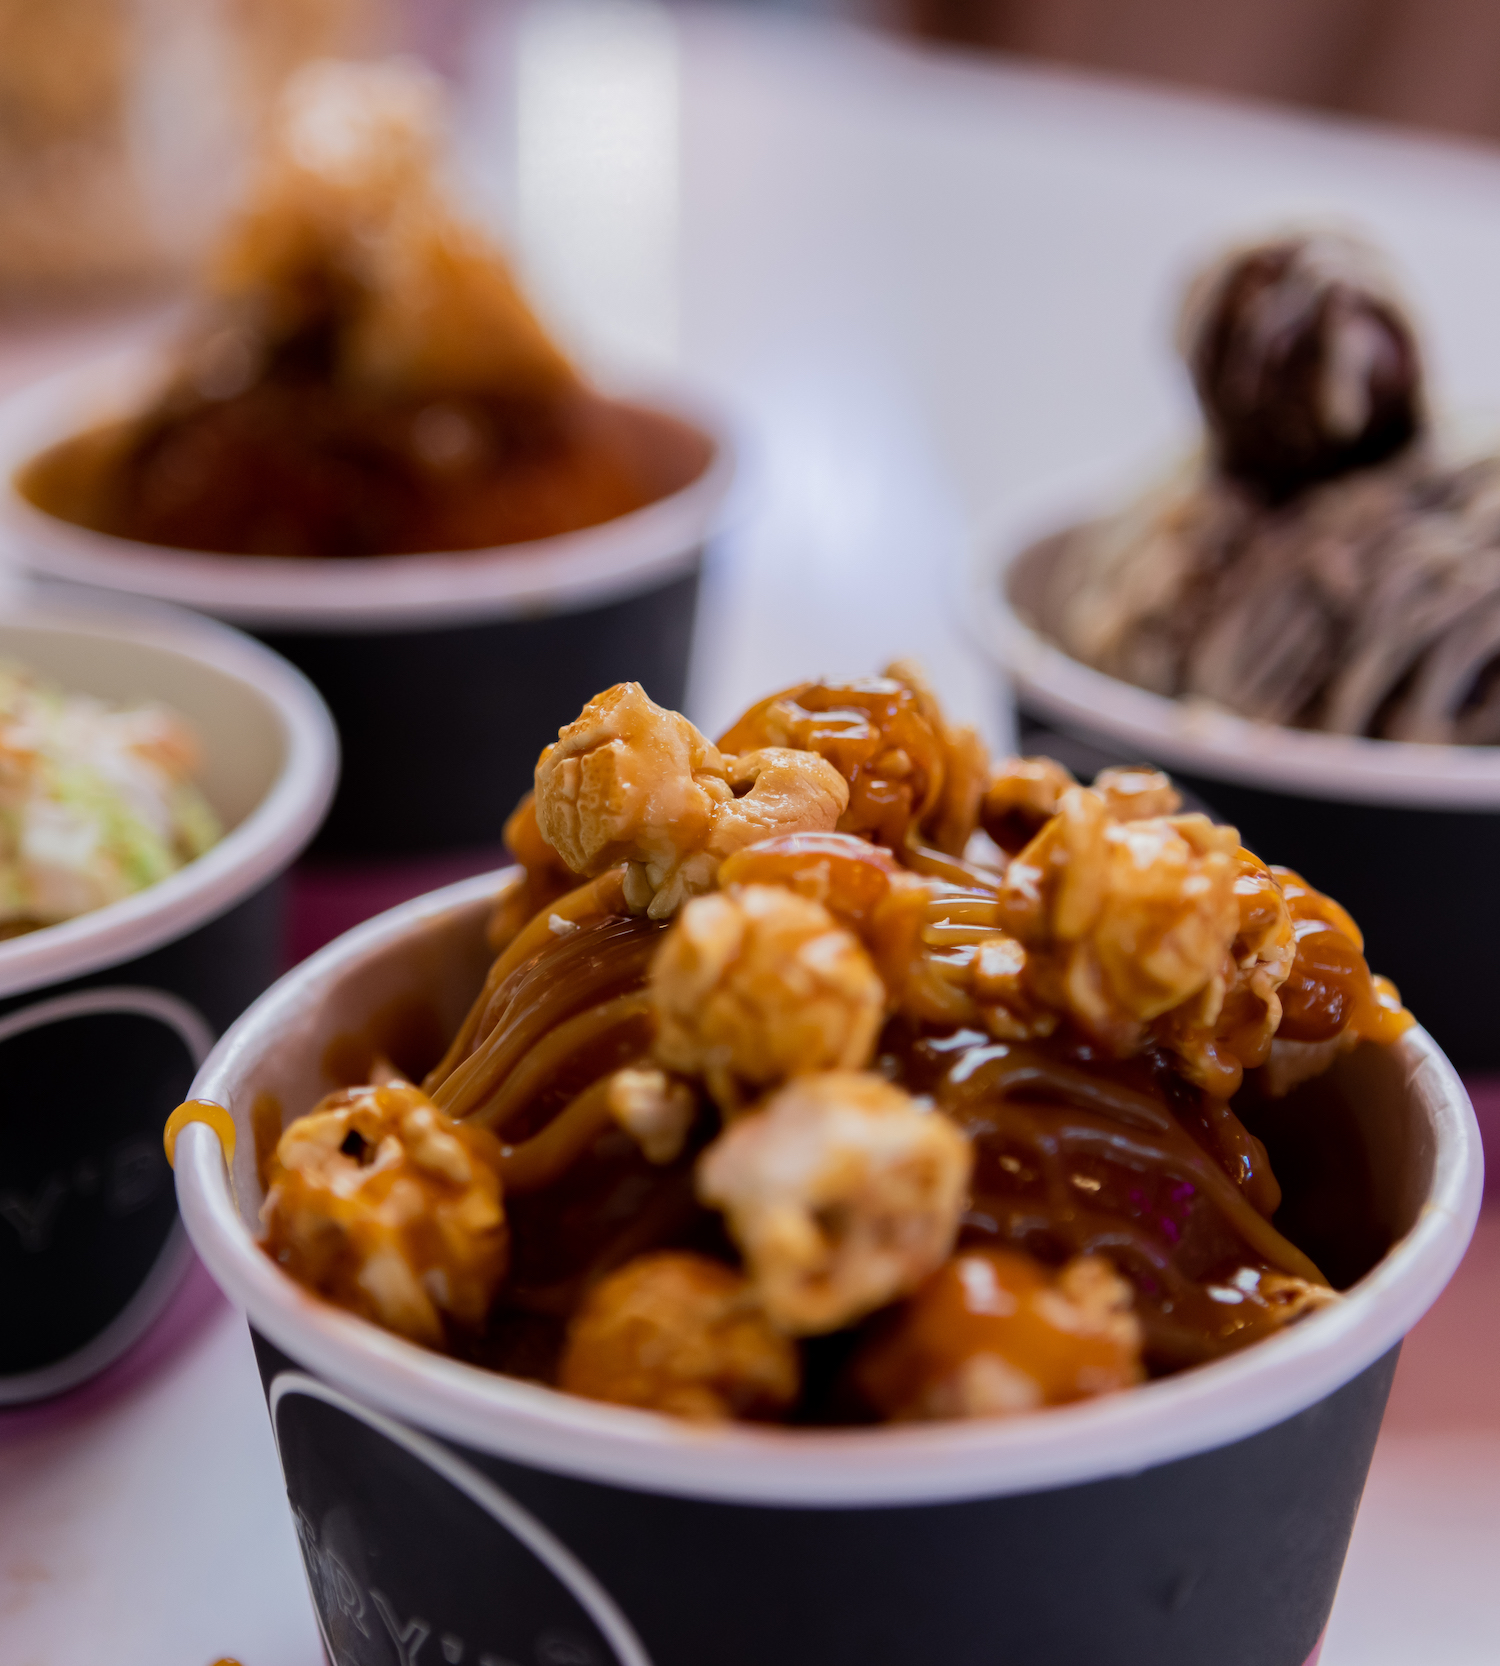 Deep-fried ice cream topped with pop corn sits in a takeaway bowl.